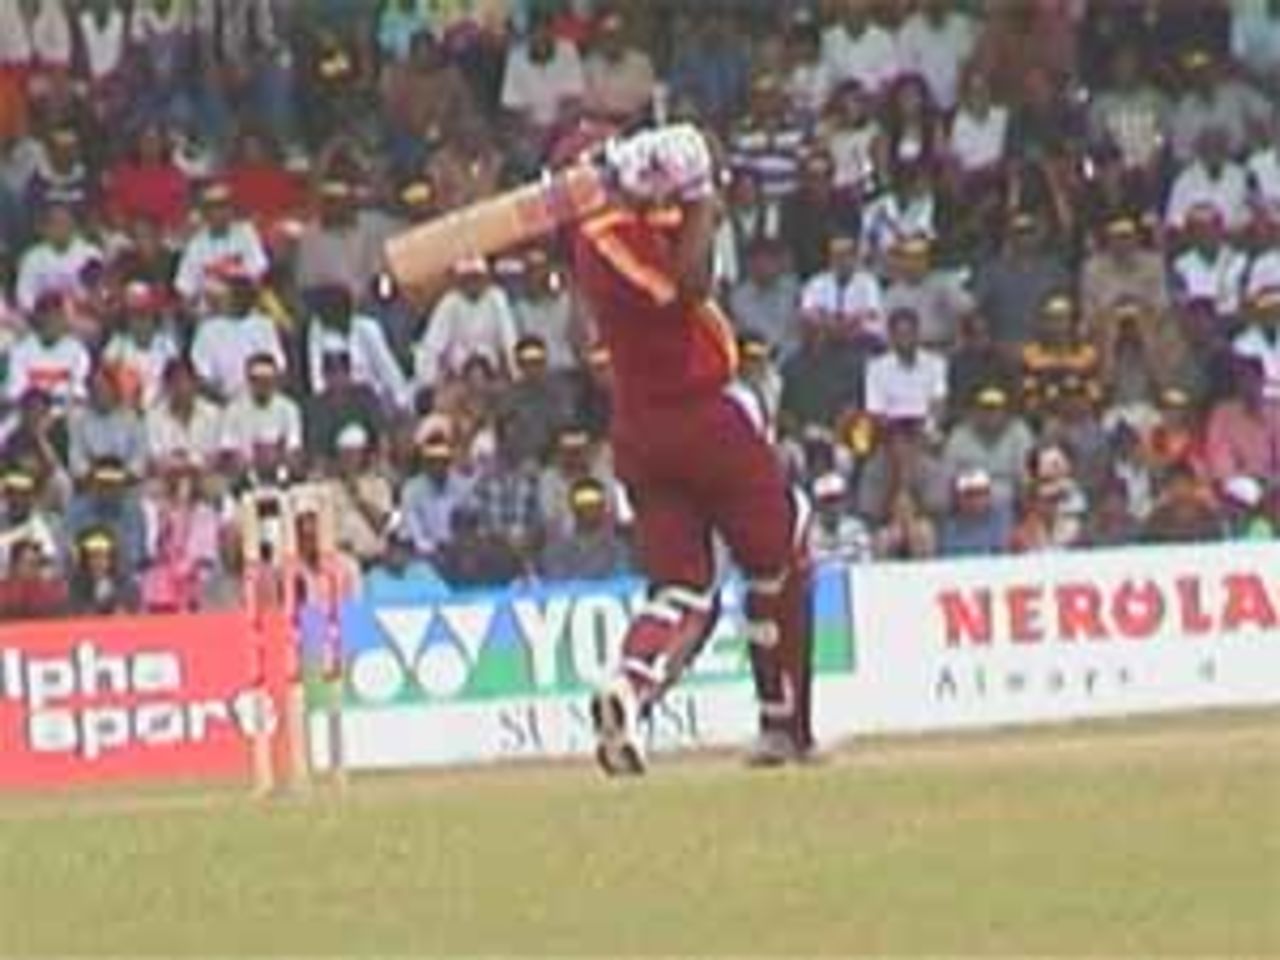 Lara thrashes the Indian bowling, India v West Indies (3rd ODI), Coca-Cola Singapore Challenge, 1999-2000, Kallang Ground, Singapore, 5 Sep 1999.